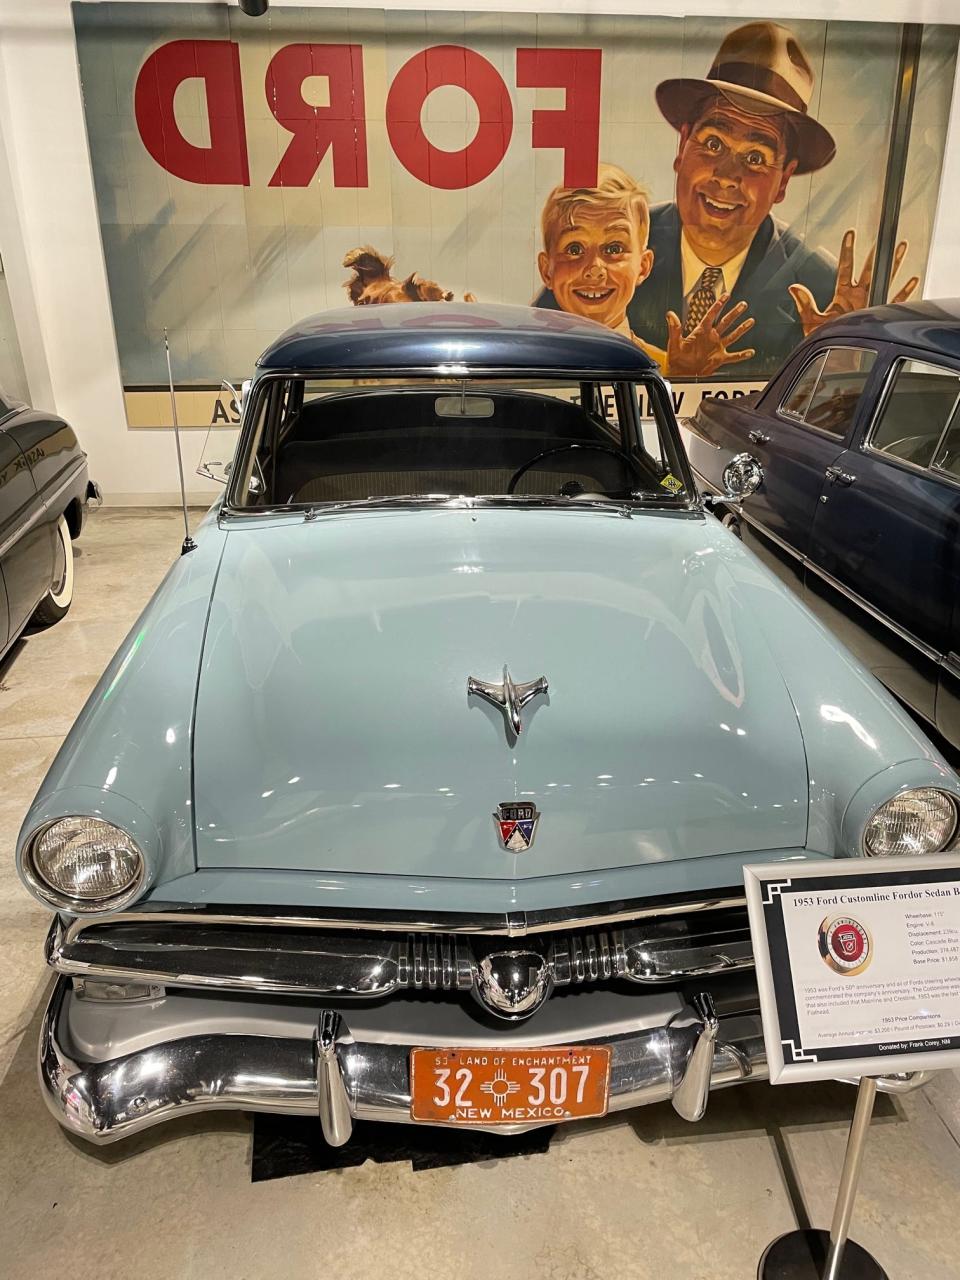 A father and son from a classic Ford campaign ogle a 1953 beauty at the Ford museum.